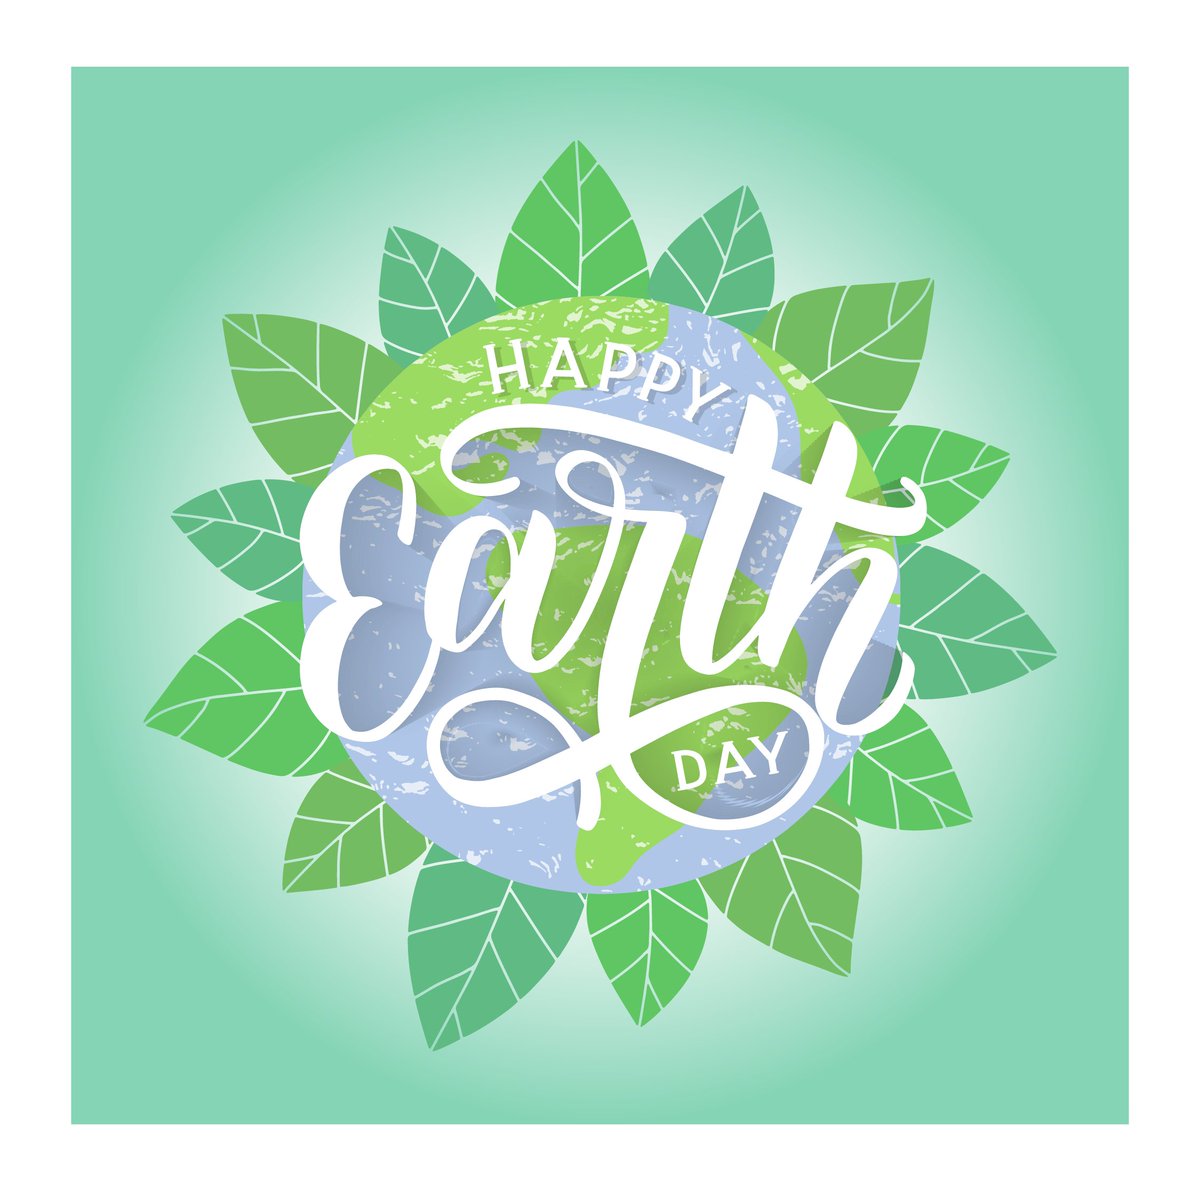 🌎 The Sustainability Council at #LAGCC is hosting its Annual #EarthDay Festival on Wednesday, 4/17 @ the E-Building Atrium from 11 am to 4 pm! 😃 There will be #Environmental groups/agencies from around NYC, games, activities, raffles, and snacks! ow.ly/1eL950RejaX